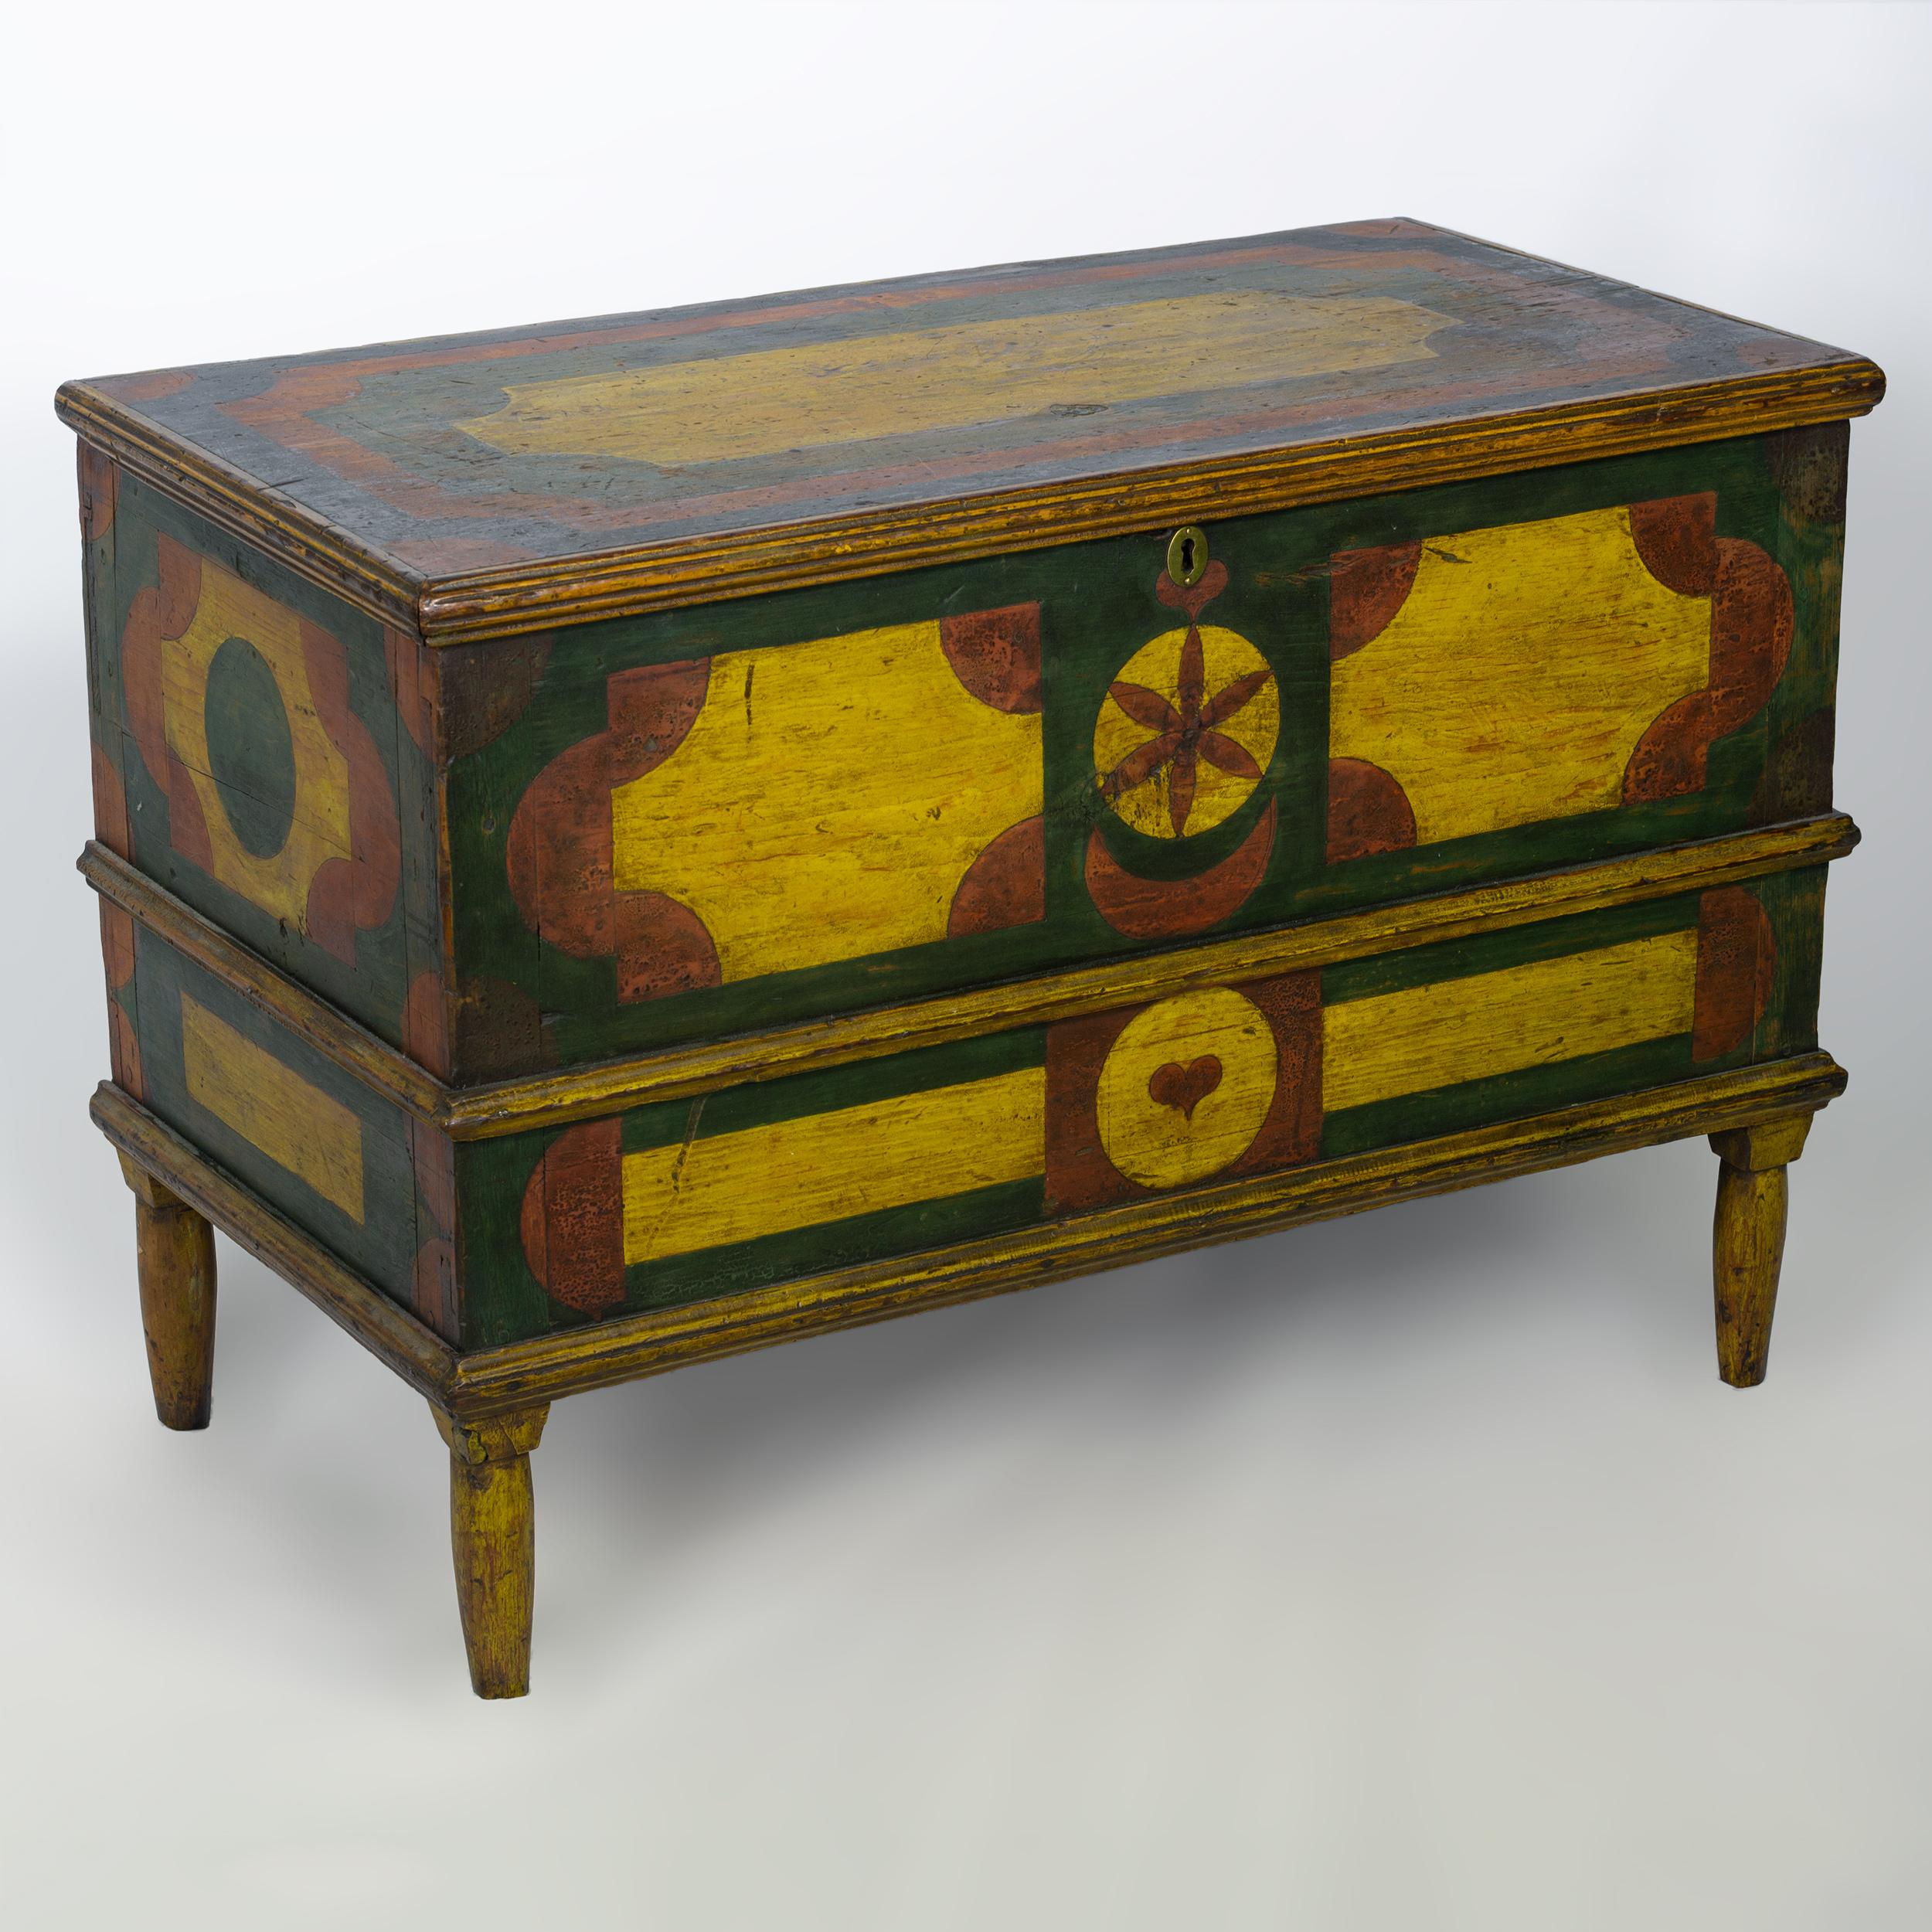 Diminutive size blanket chest with
multicolored geometric painted design
with applied molding standing on bracket base
short turned legs, Western New York,
circa 1820. Measures: 20 ½” x 32” x 17”.

  